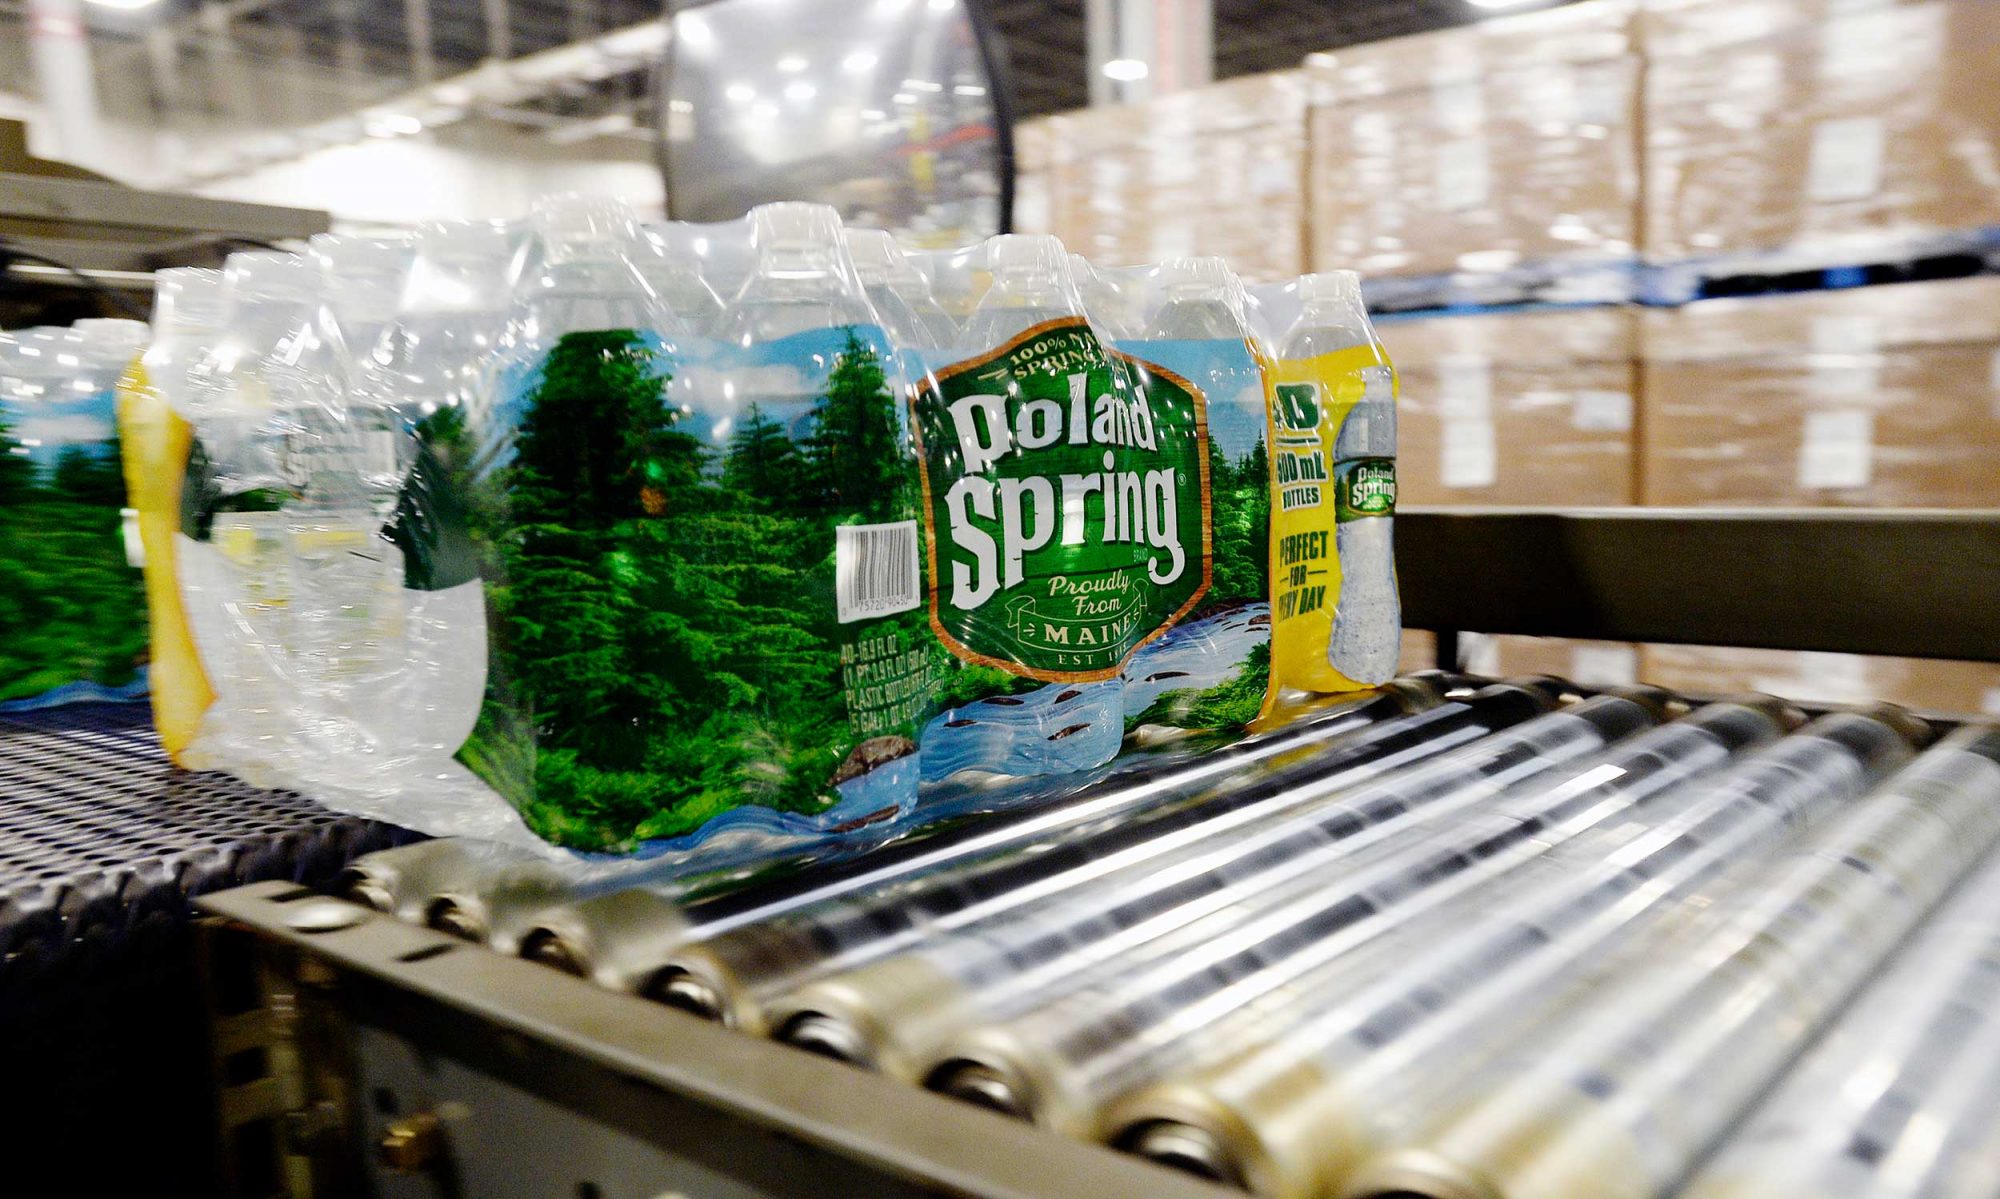 EC: Poland Spring Water Isn't Spring Water, According to New Lawsuit